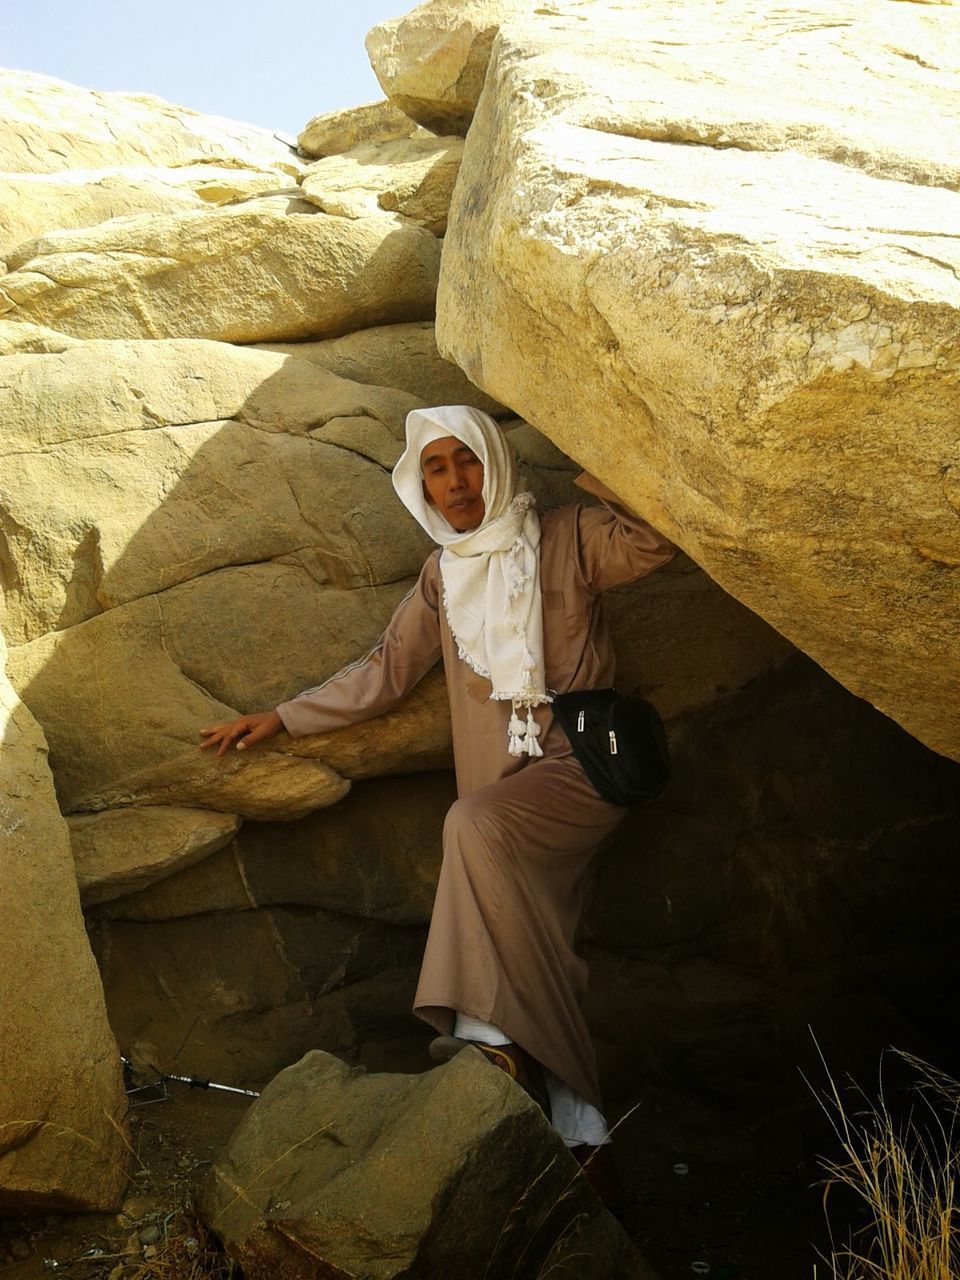 MIDSECTION OF WOMAN HOLDING ROCK ON ROCKS